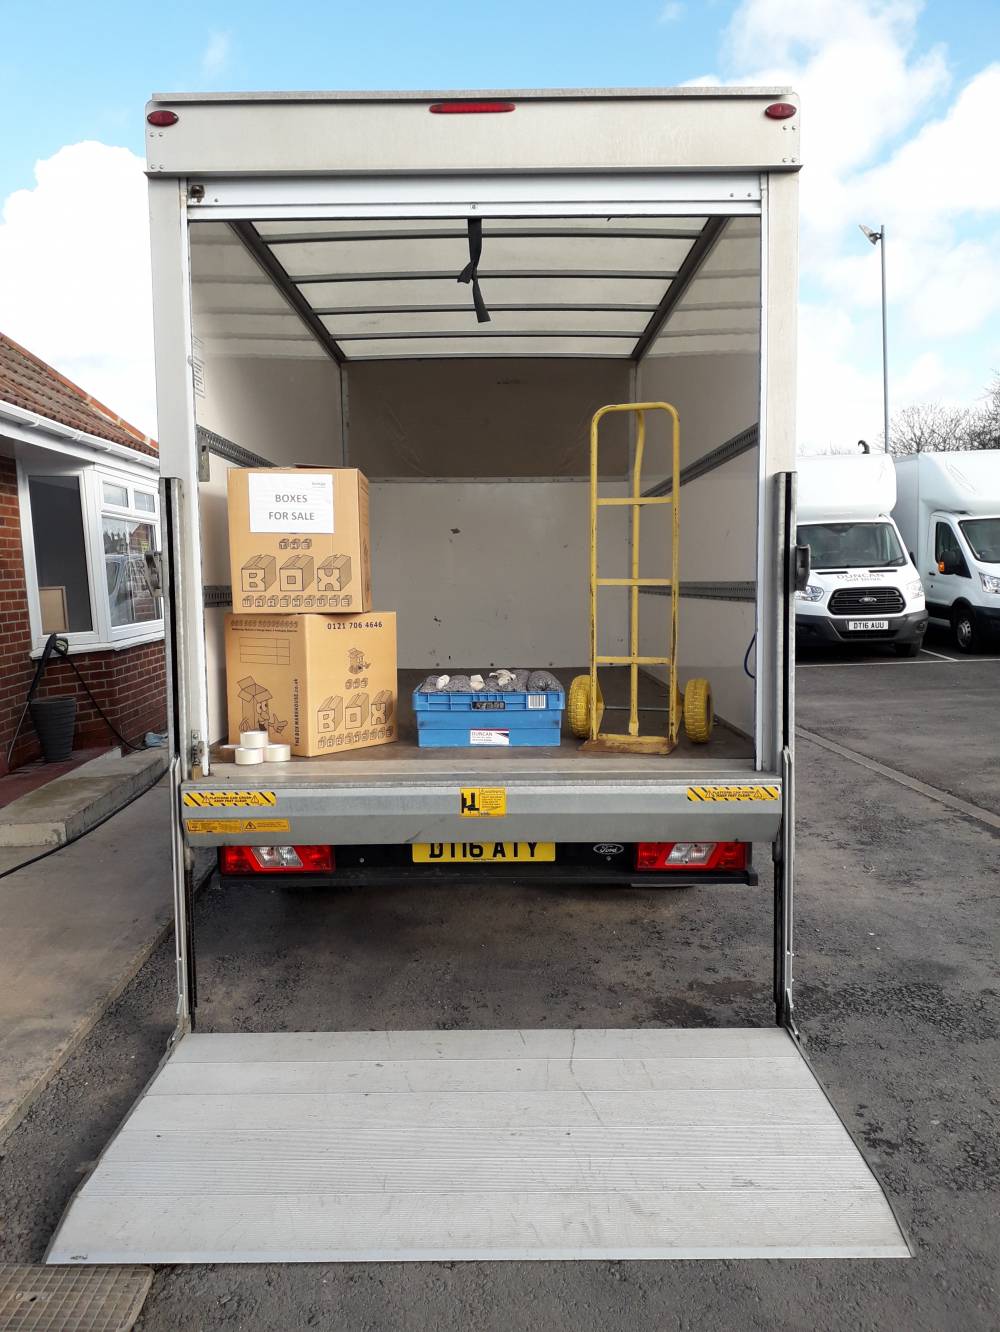 luton van with tail lift for sale